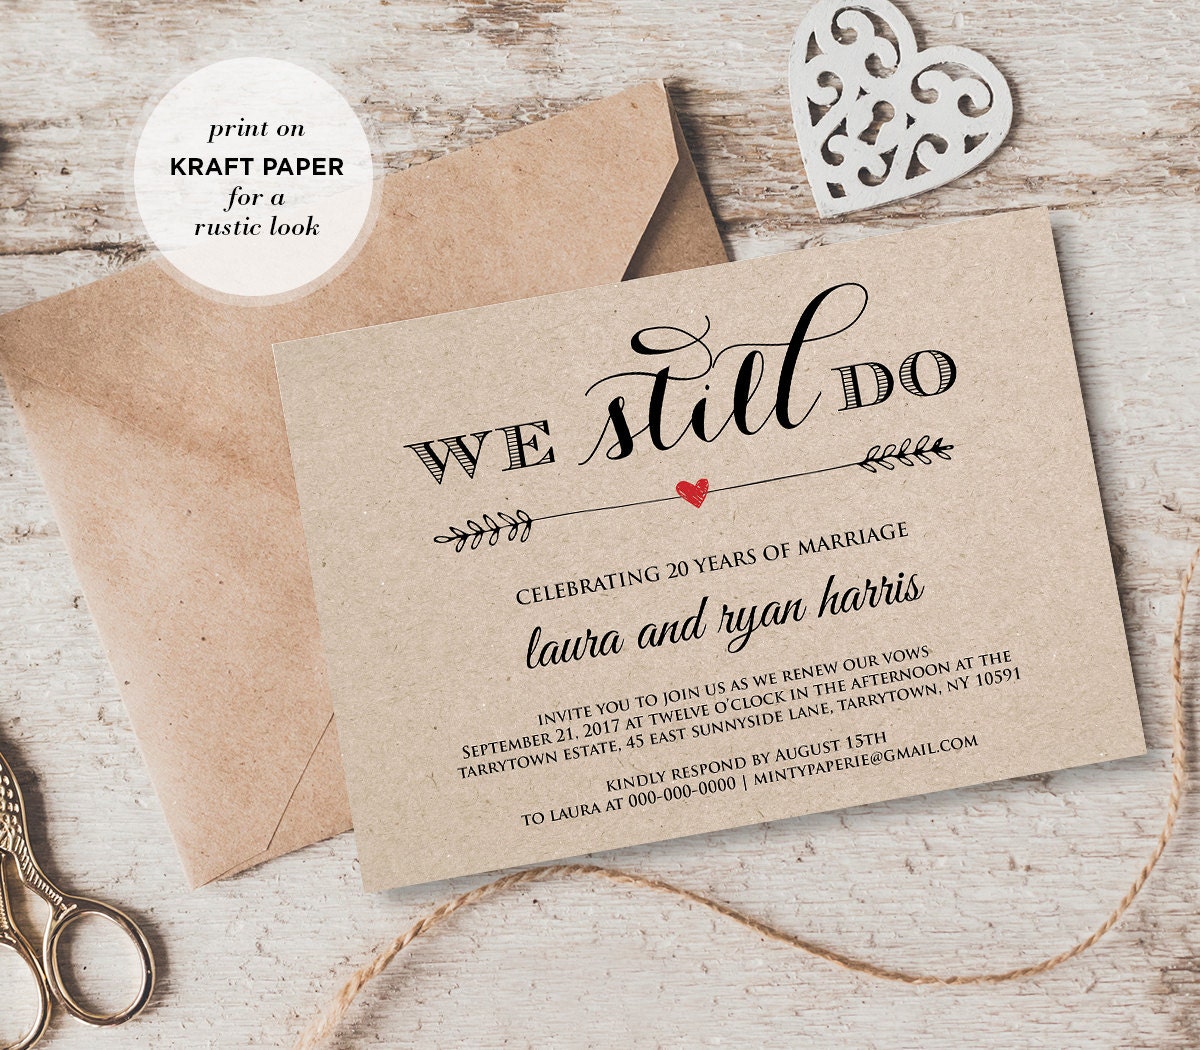 Vow Renewal Invitation Template, We Still Do, Instant Download, Wedding